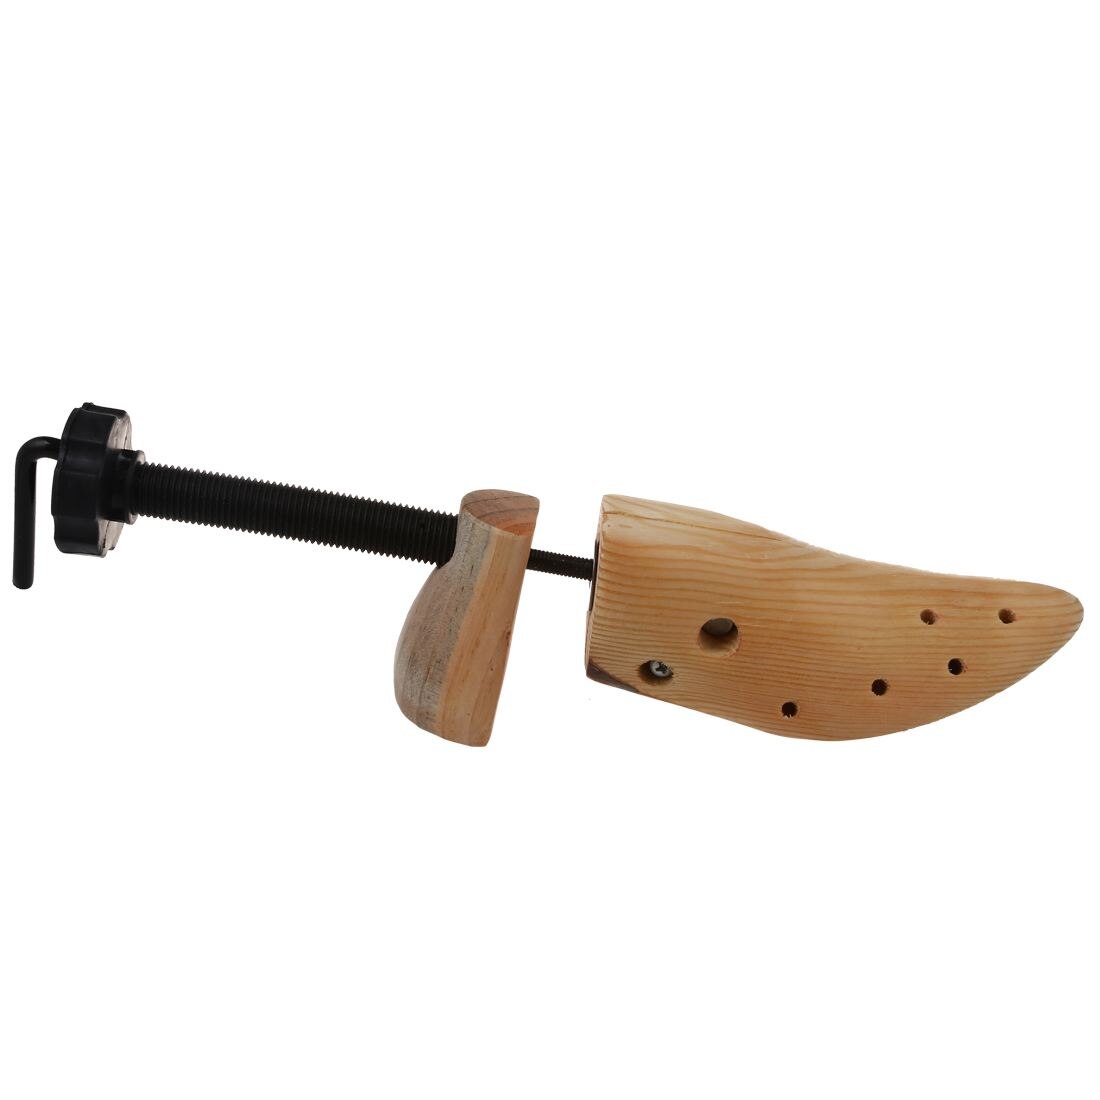 New Wooden shoe trees Adjustable Shape For Women's Shoes Size 3-11.5 (UK size) - ebowsos